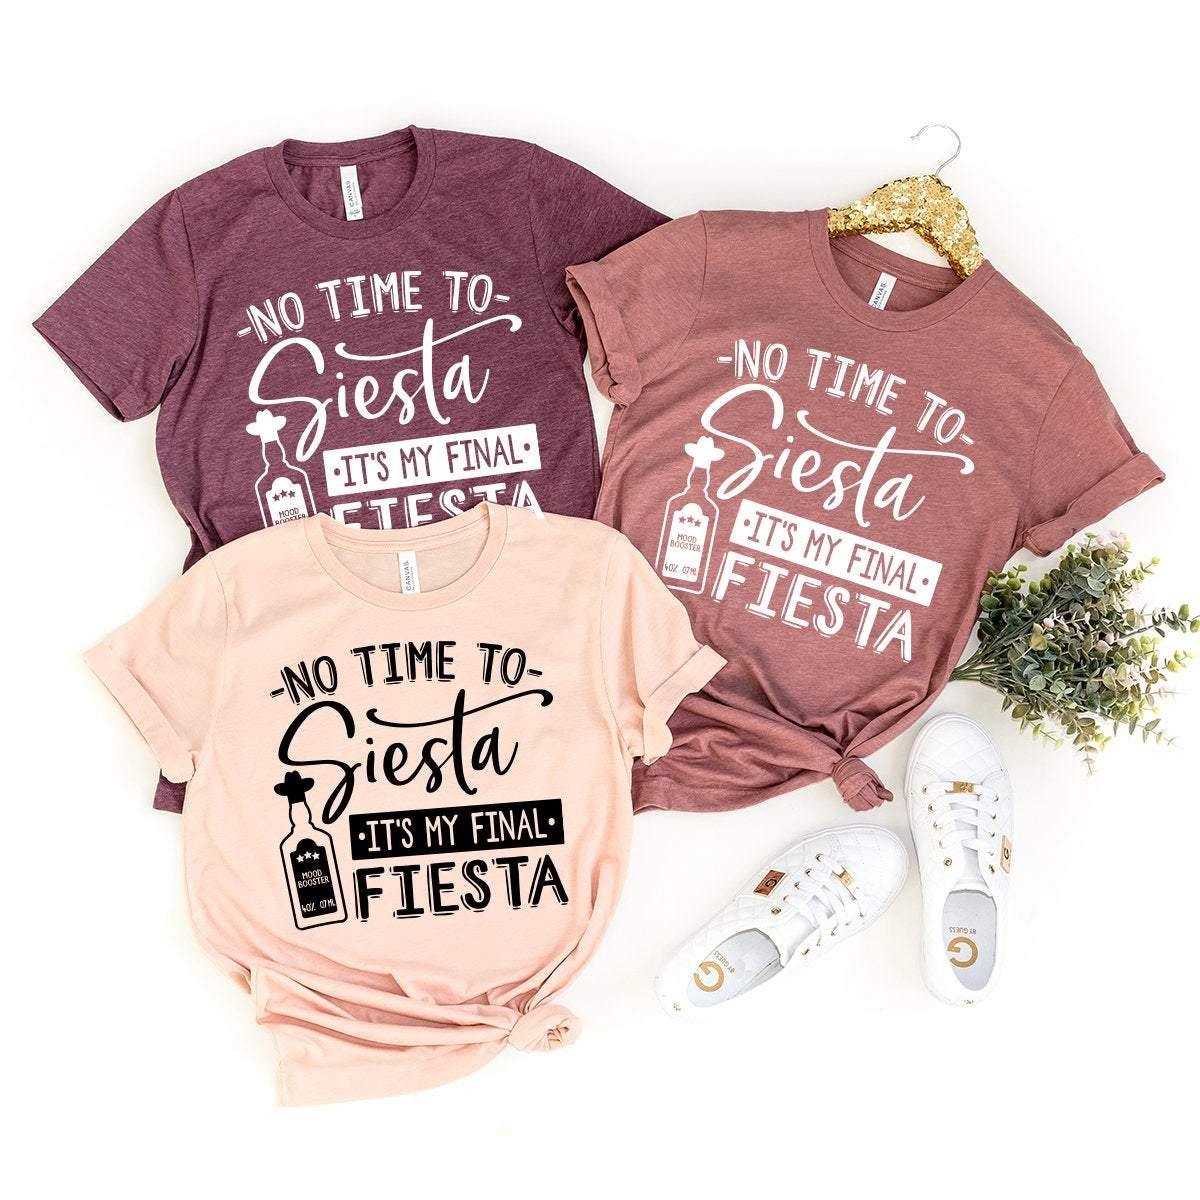 Tequila Shirt, No Time To Siesta It's My Final Fiesta Shirt, Drinking Shirt, Drinking Friends Gift, Funny Drinking Shirt, Cinco De Mayo Tee - Fastdeliverytees.com